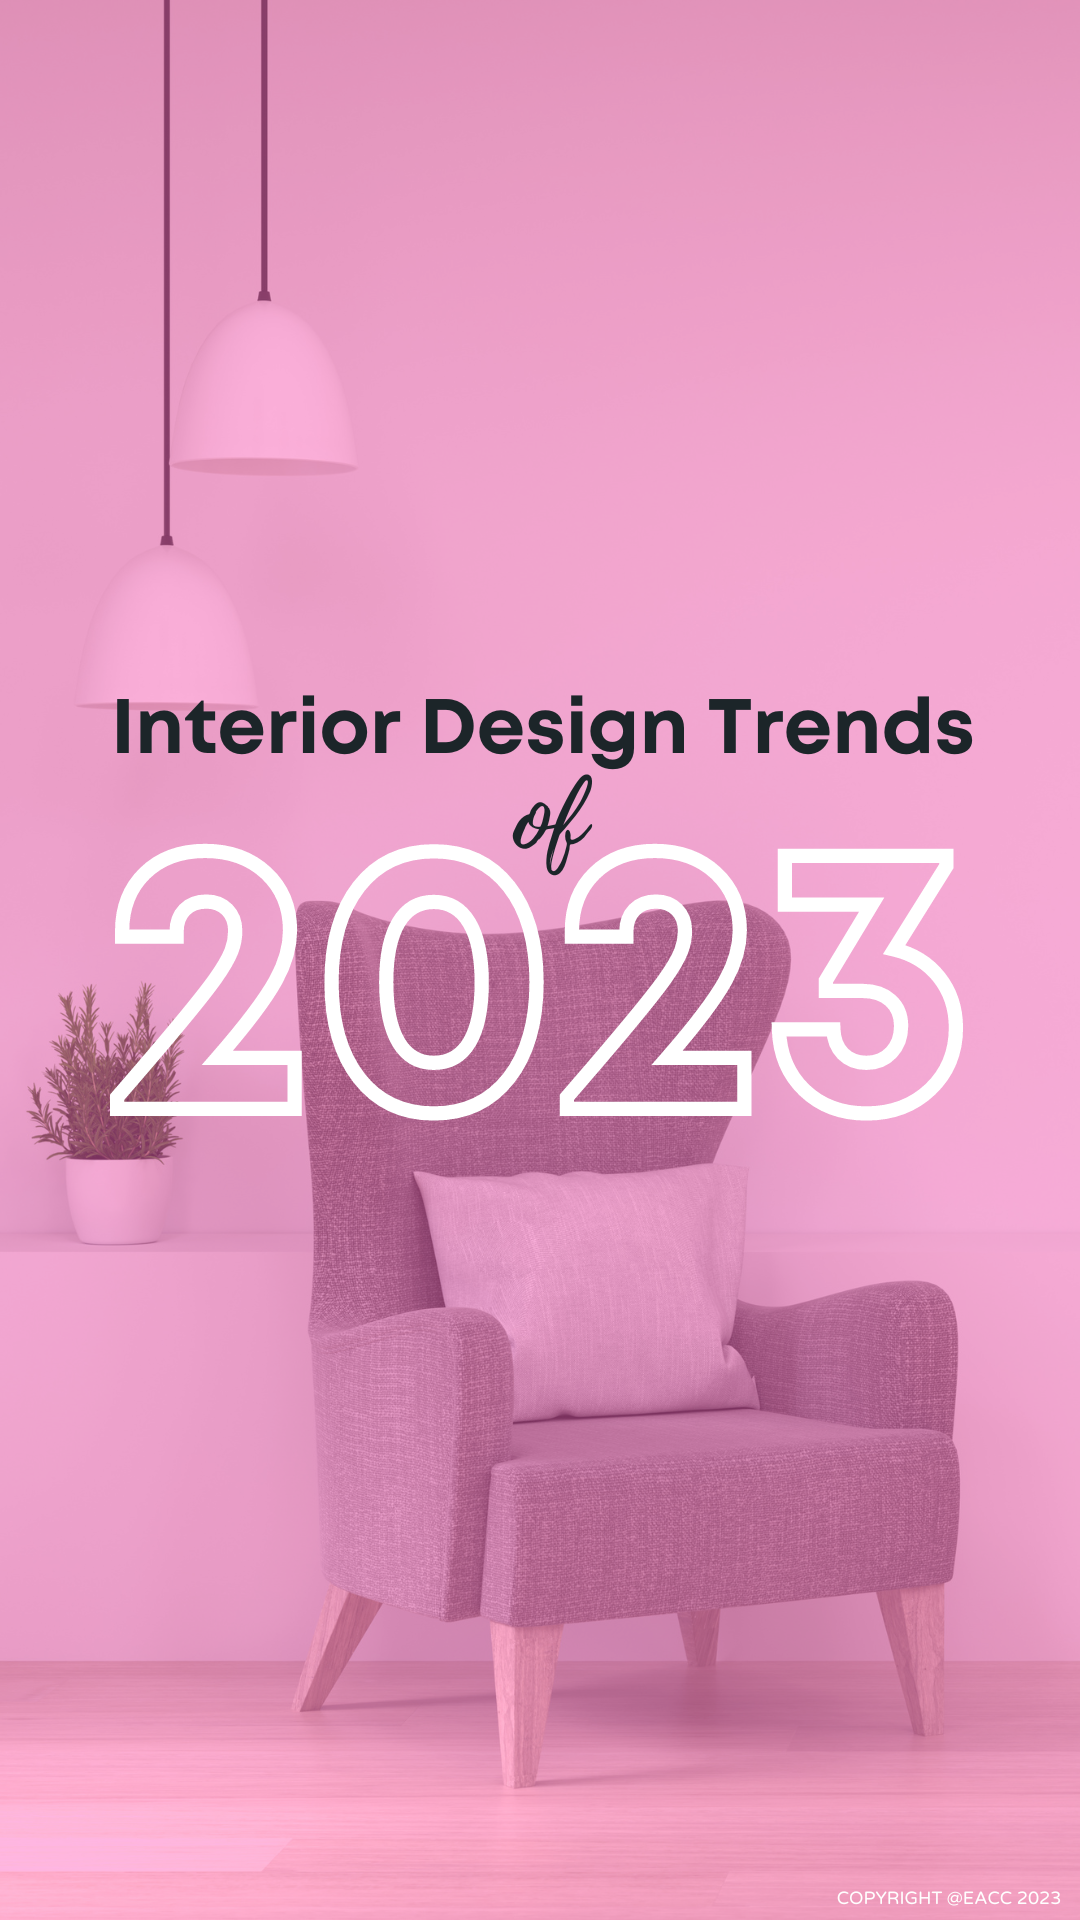 The Interior Design Trends to Look Out for in Brighton and Hove in 2023